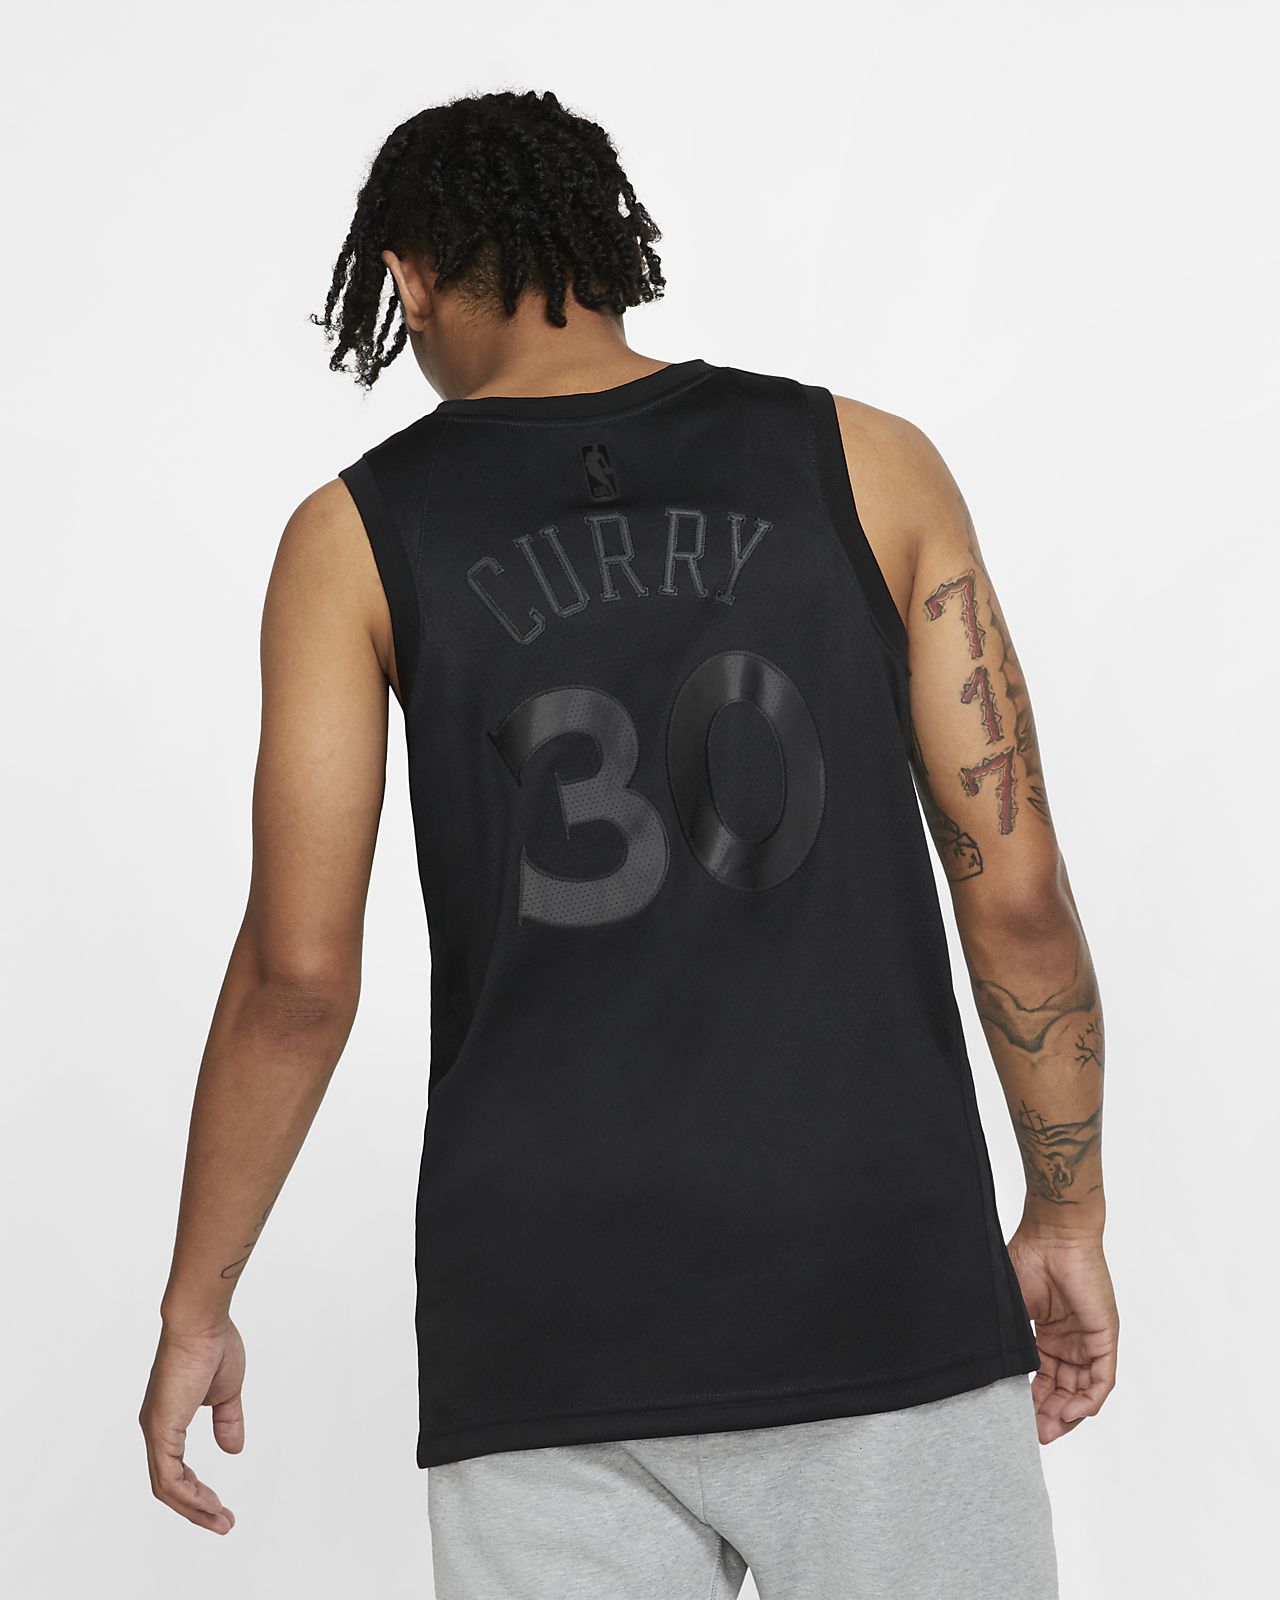 cool steph curry shirts